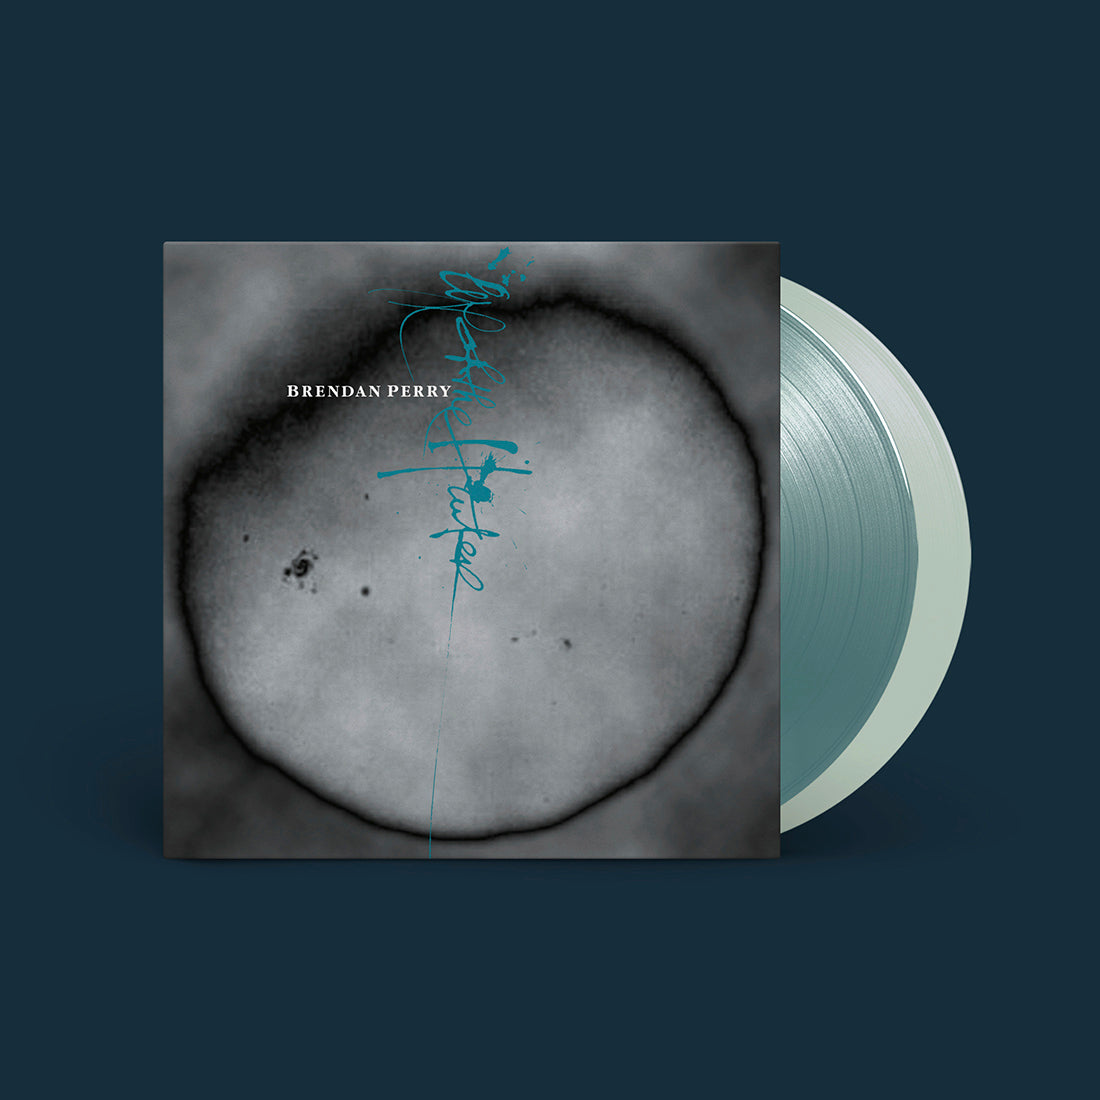 Brendan Perry - Eye of the Hunter - Live at the I.C.A: Transparent Teal-Seafoam Green Vinyl 2LP